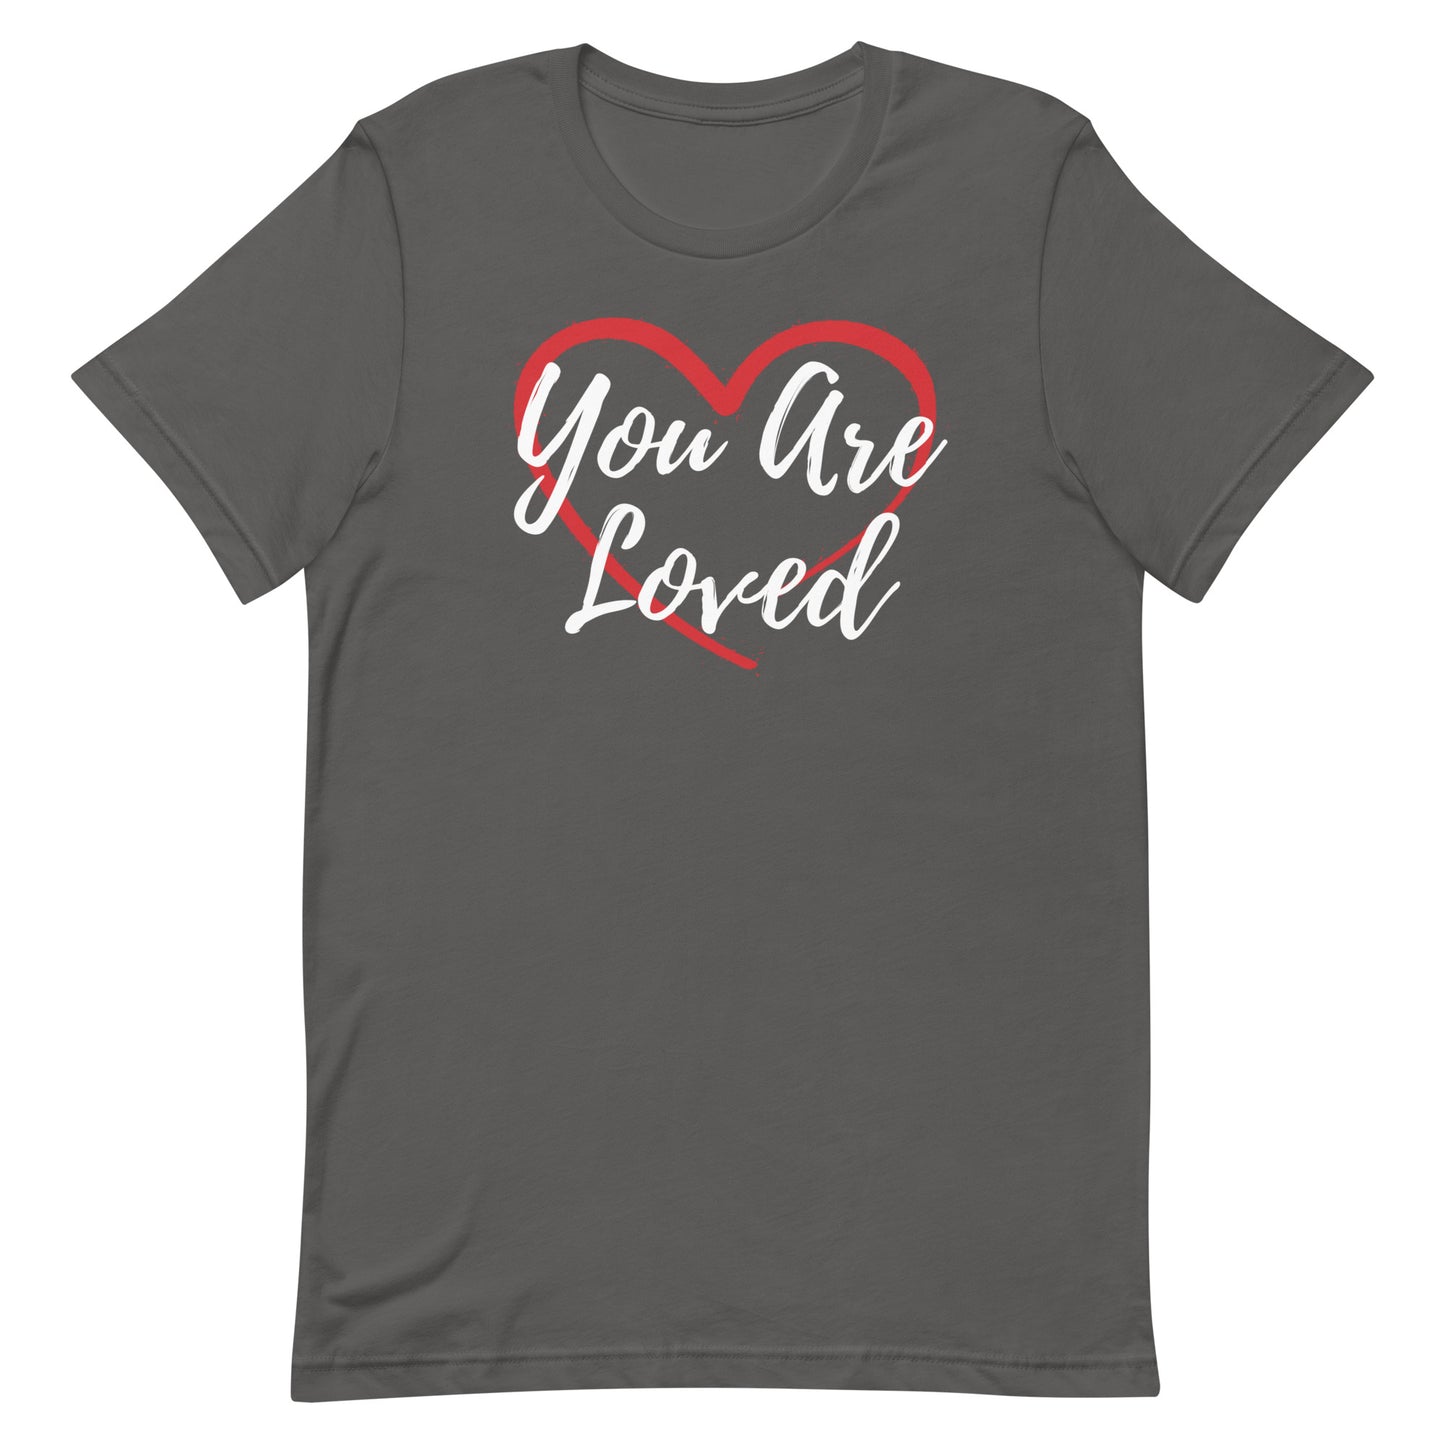 You Are Loved! T-Shirt